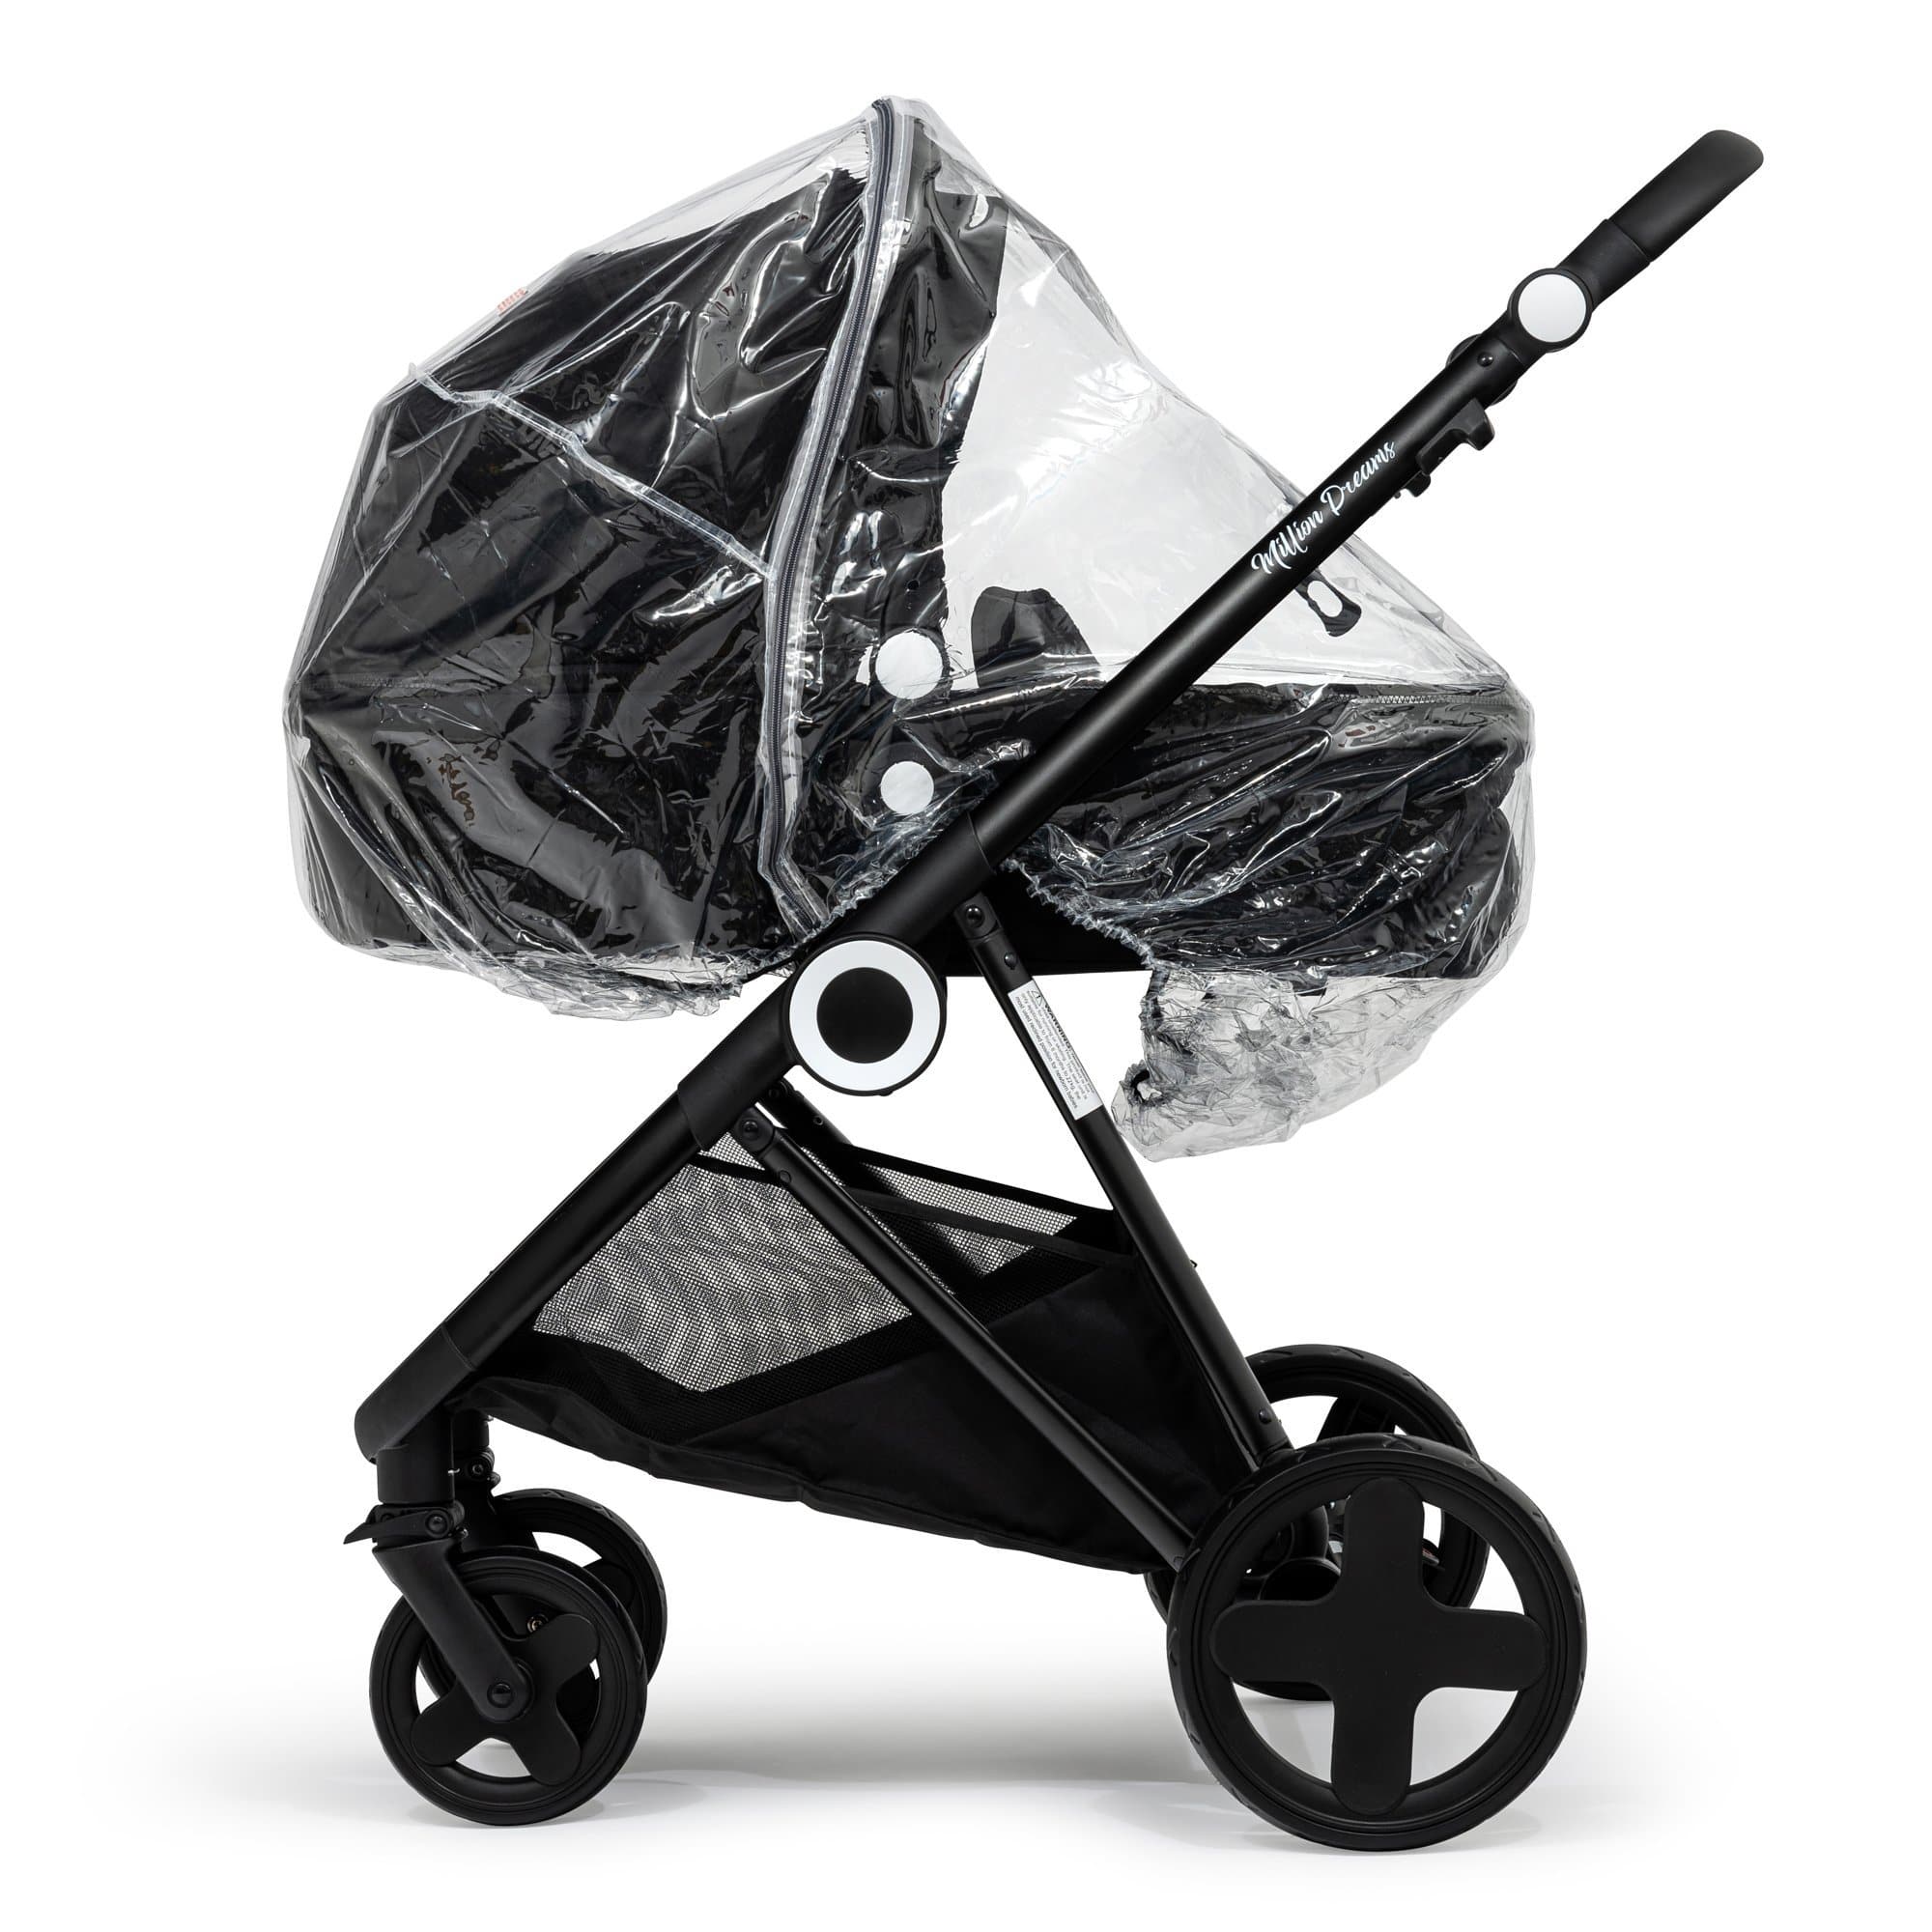 2 in 1 Rain Cover Compatible with DoBuggy - Fits All Models - For Your Little One